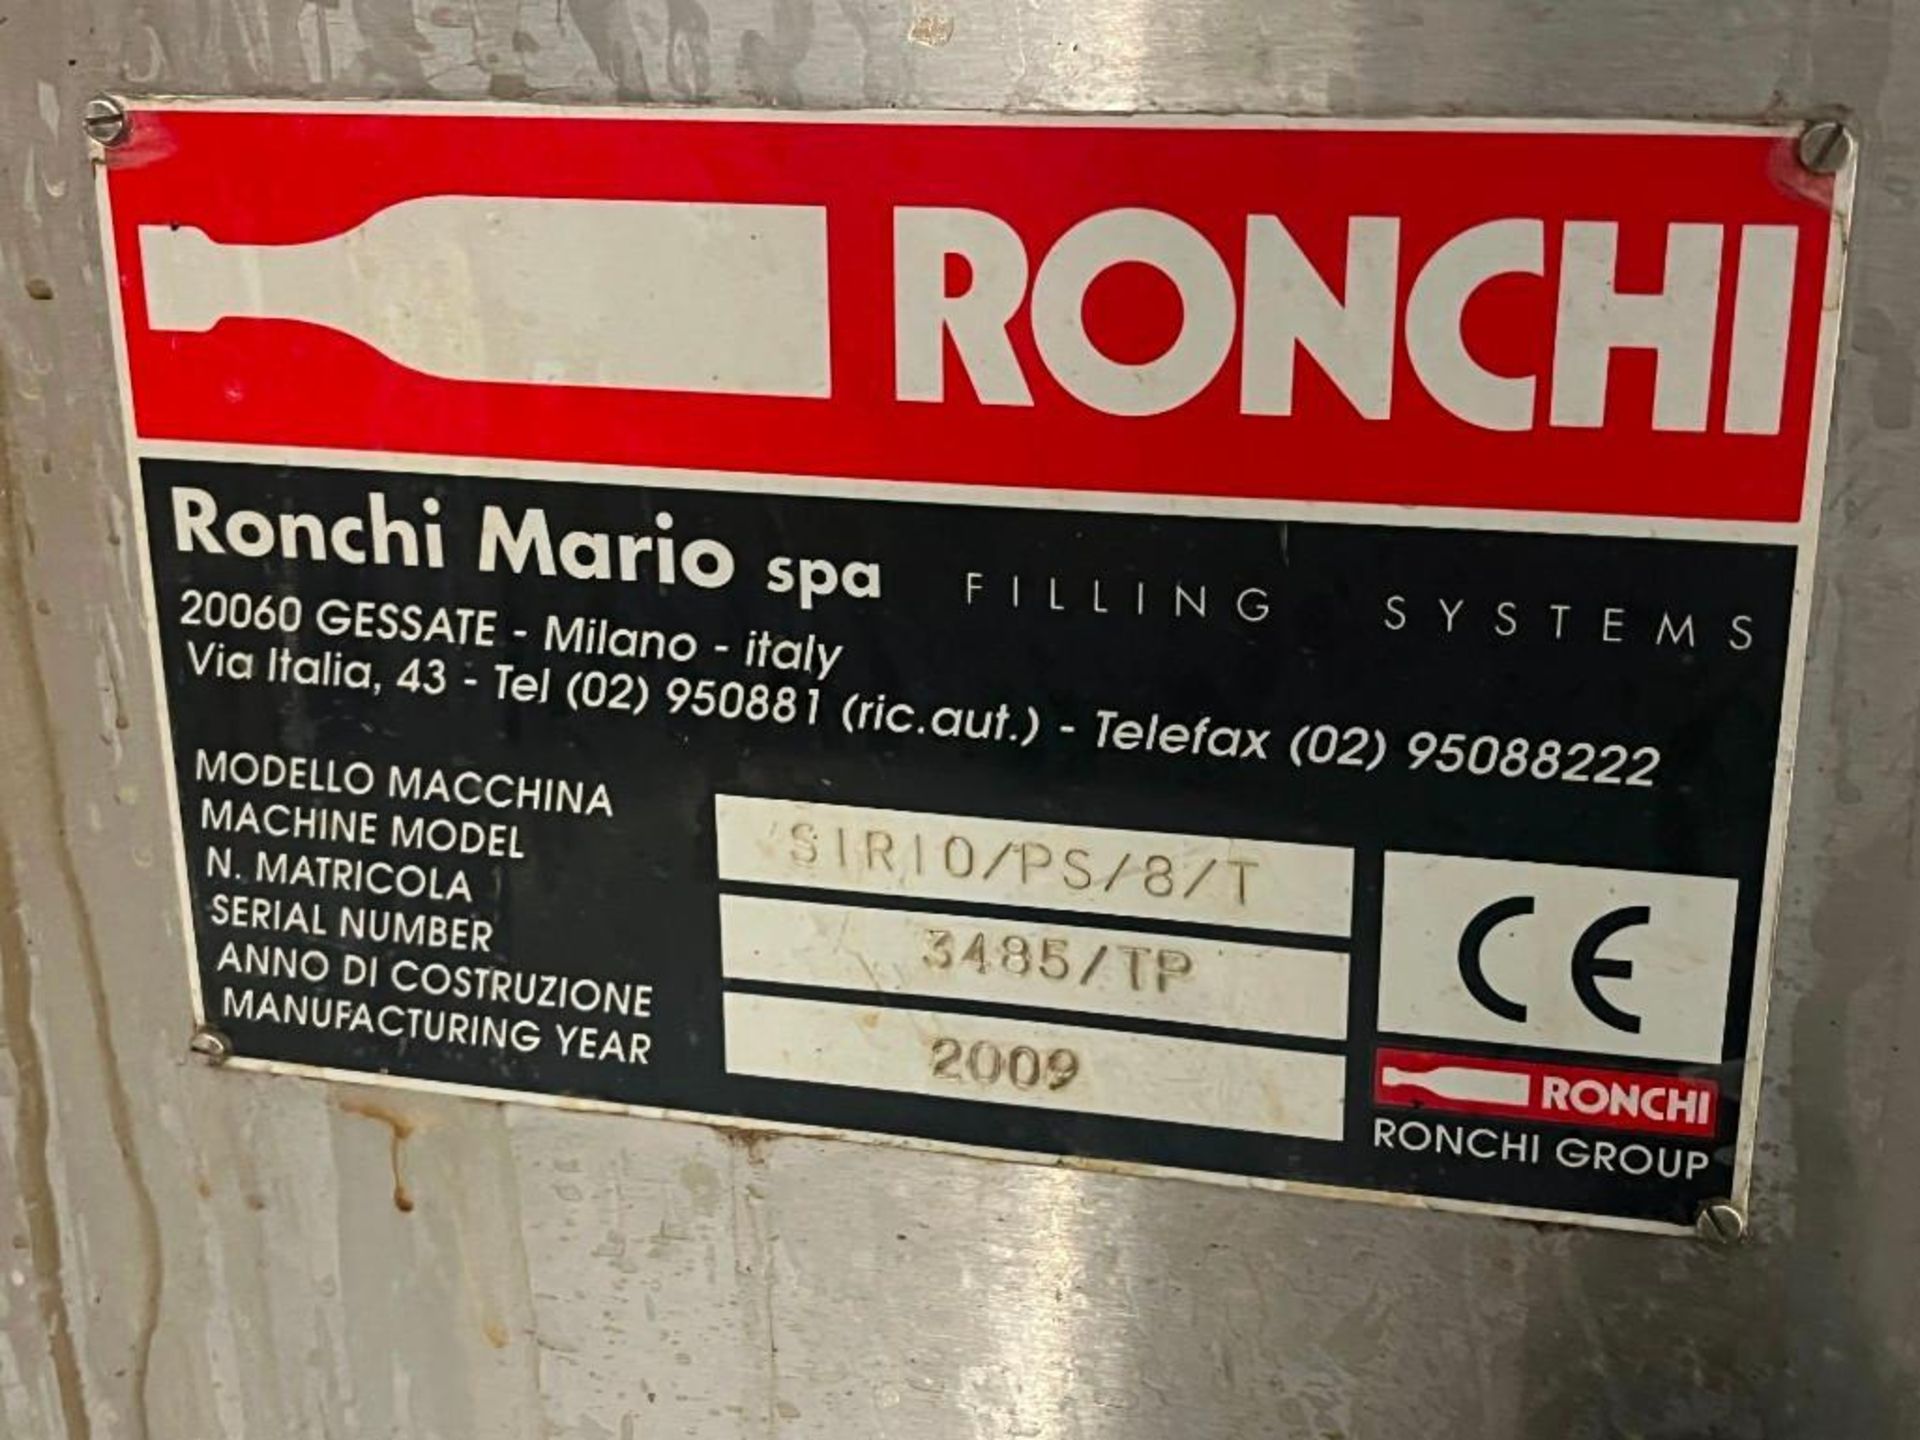 Ronchi 8-Head Rotary Chuck Capper, Model Sirio/PS/8/1, S/N: 3485/TP. Includes Ronchi centrifugal bow - Image 3 of 102